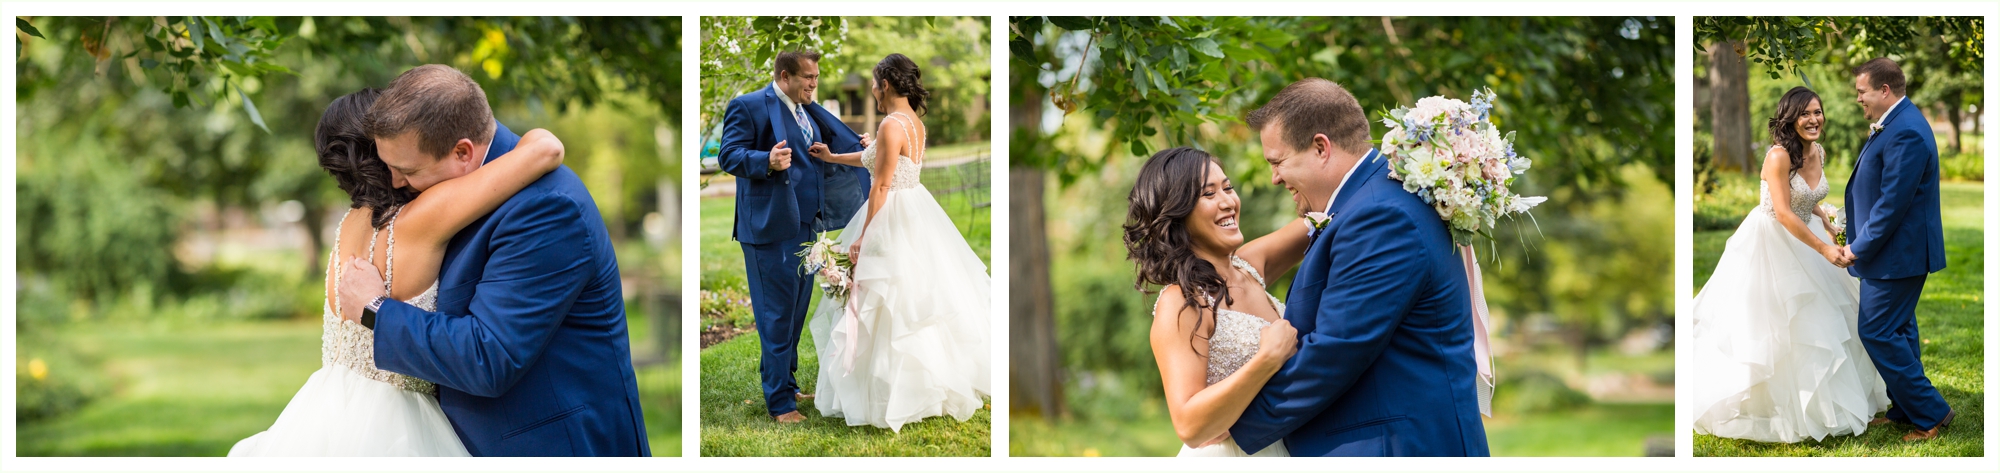 bride and groom share first look in boulder colorado near chautauqua park